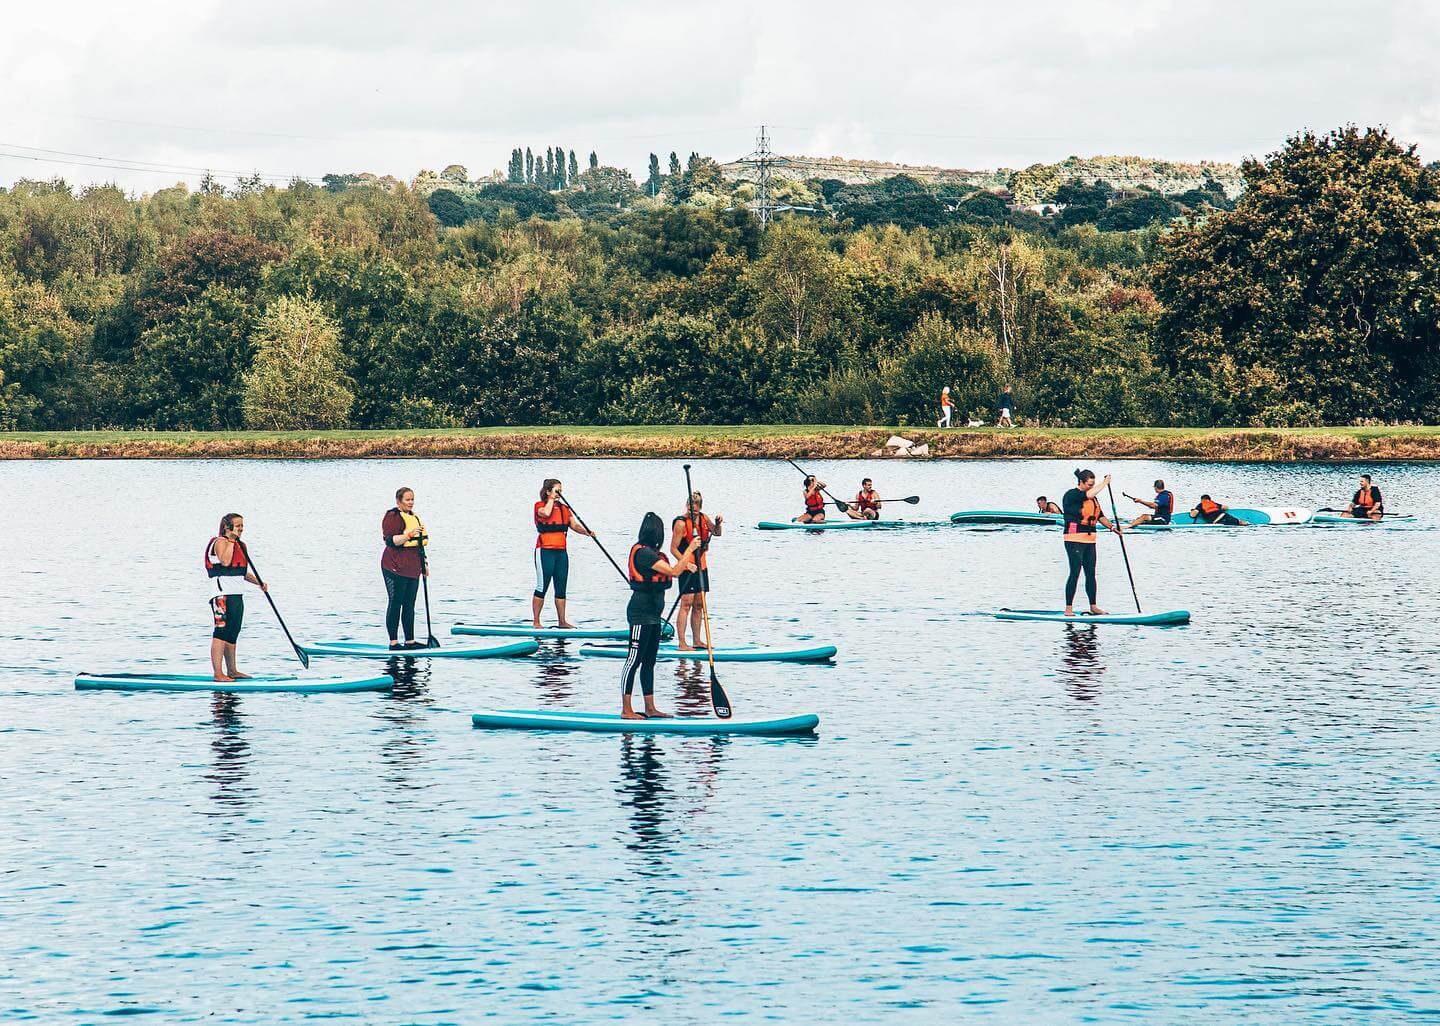 People paddle boarding at Manley Mere in Cheshire, England